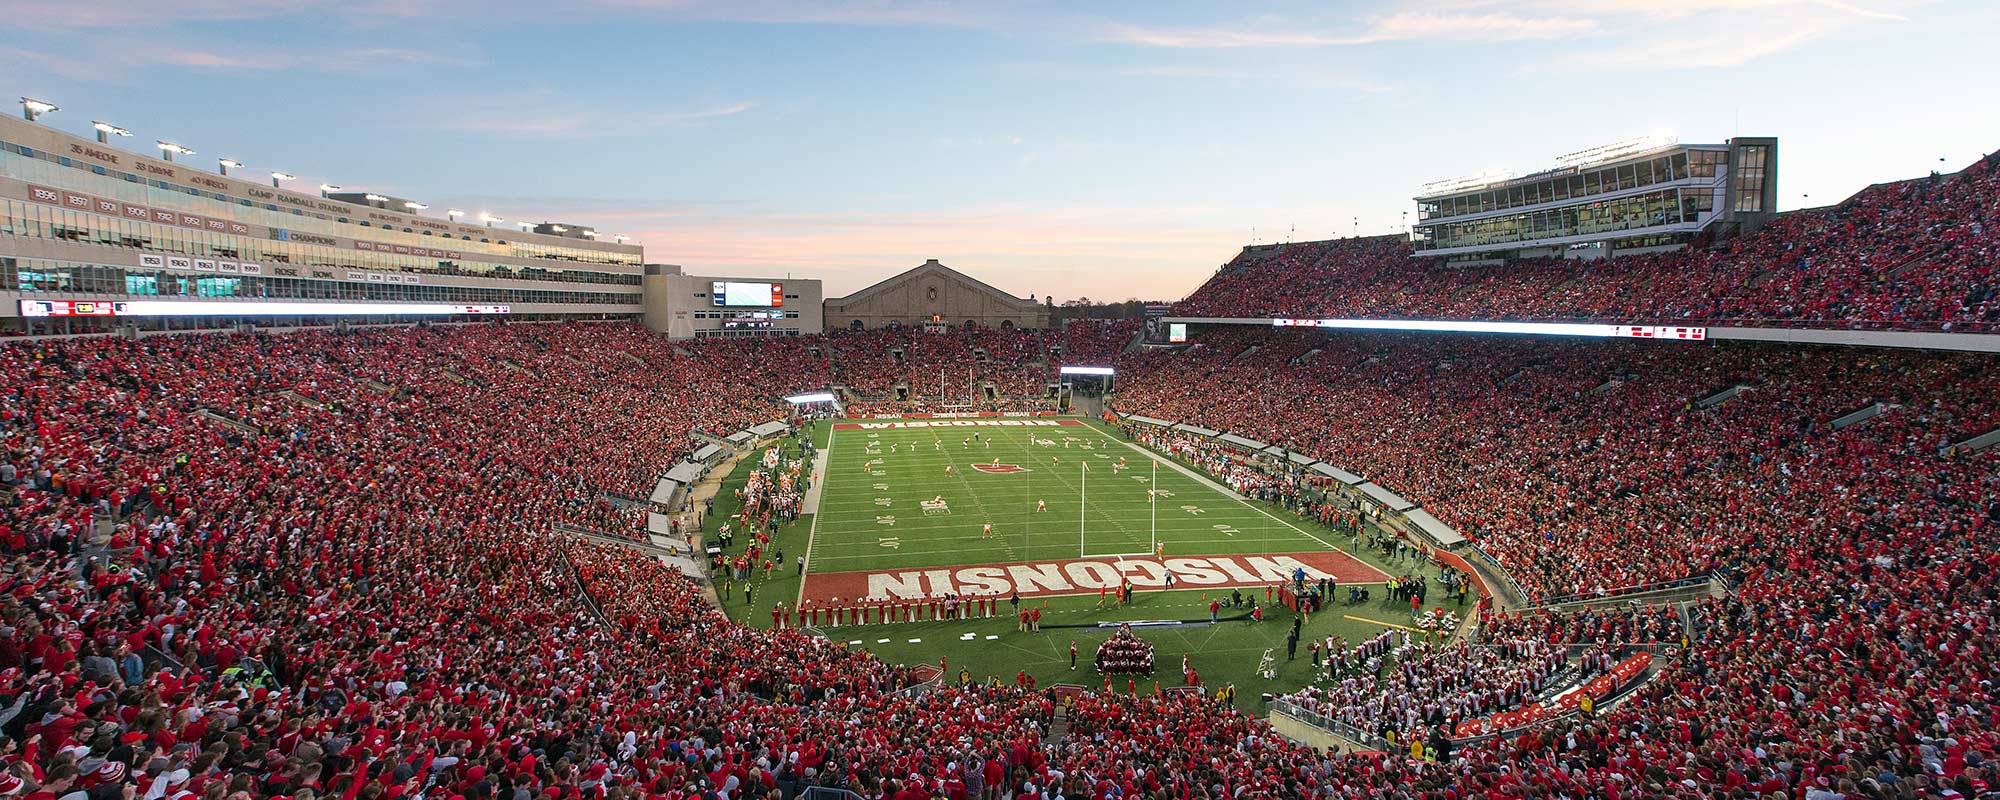 A Wide Angle Shot of a Home Football Game at Camp Randall